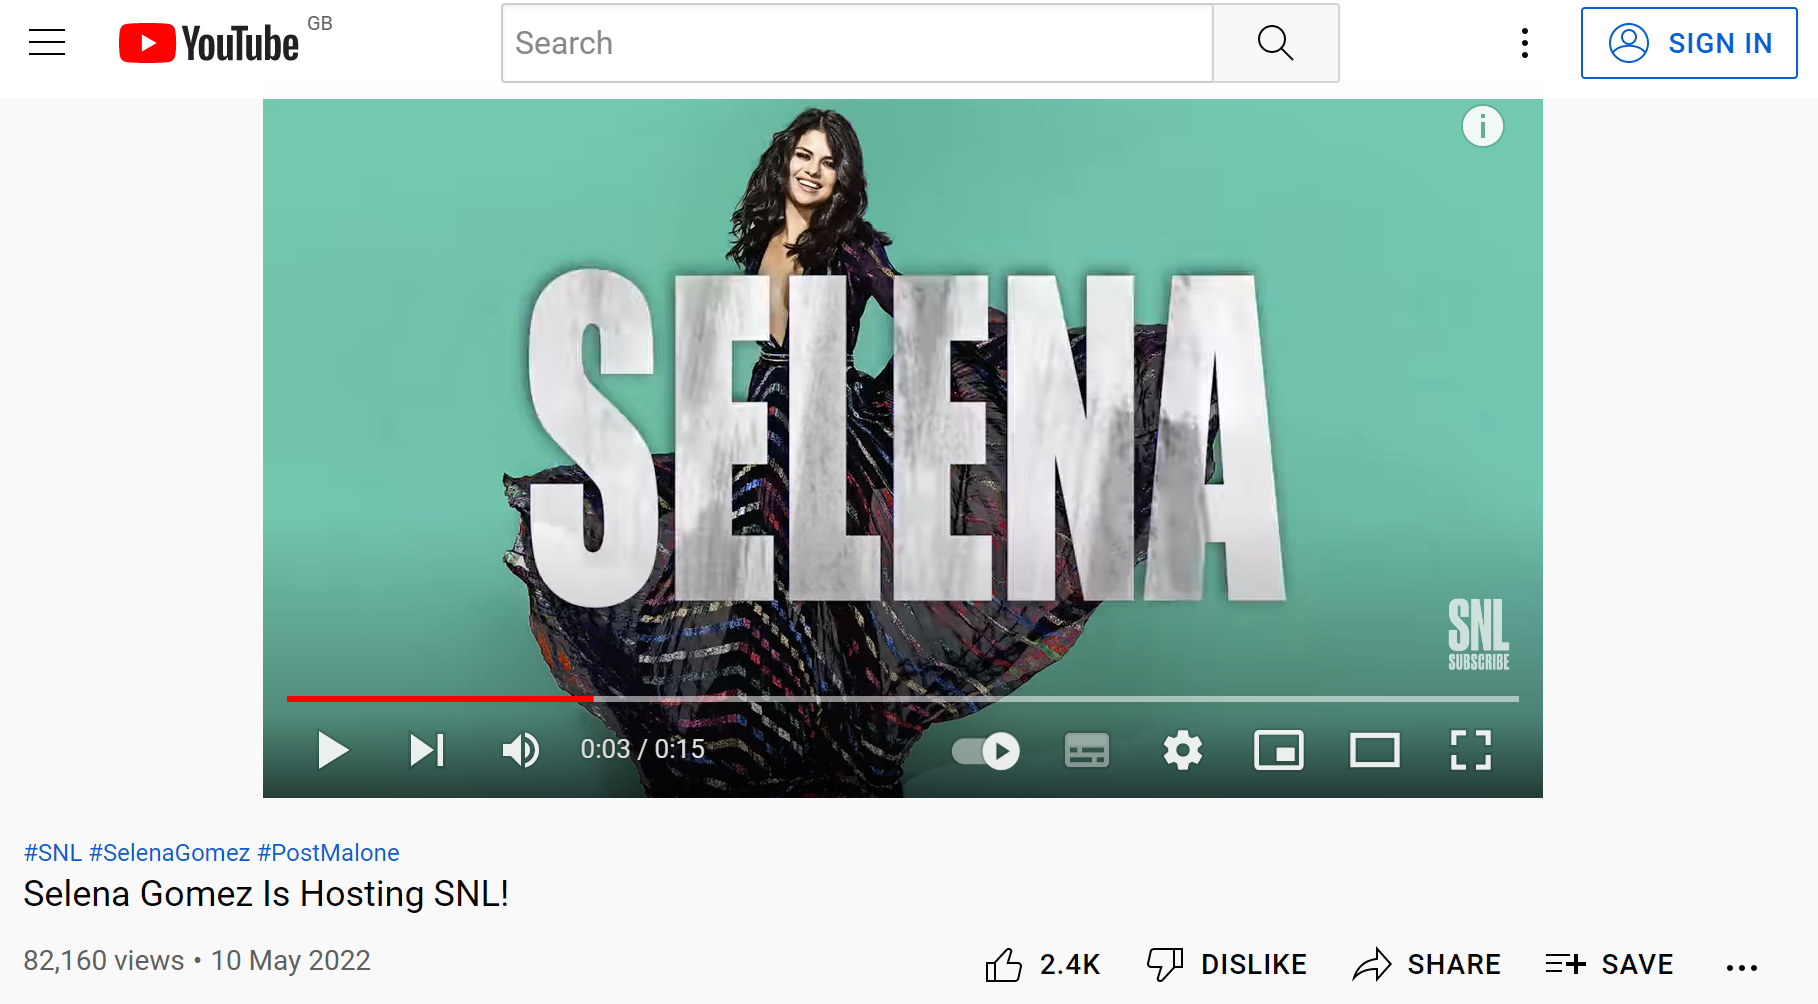 how-to-create-unforgettable-experiences-for-your-audience-empower-action-youtube-selena-gomez-snl-example-3